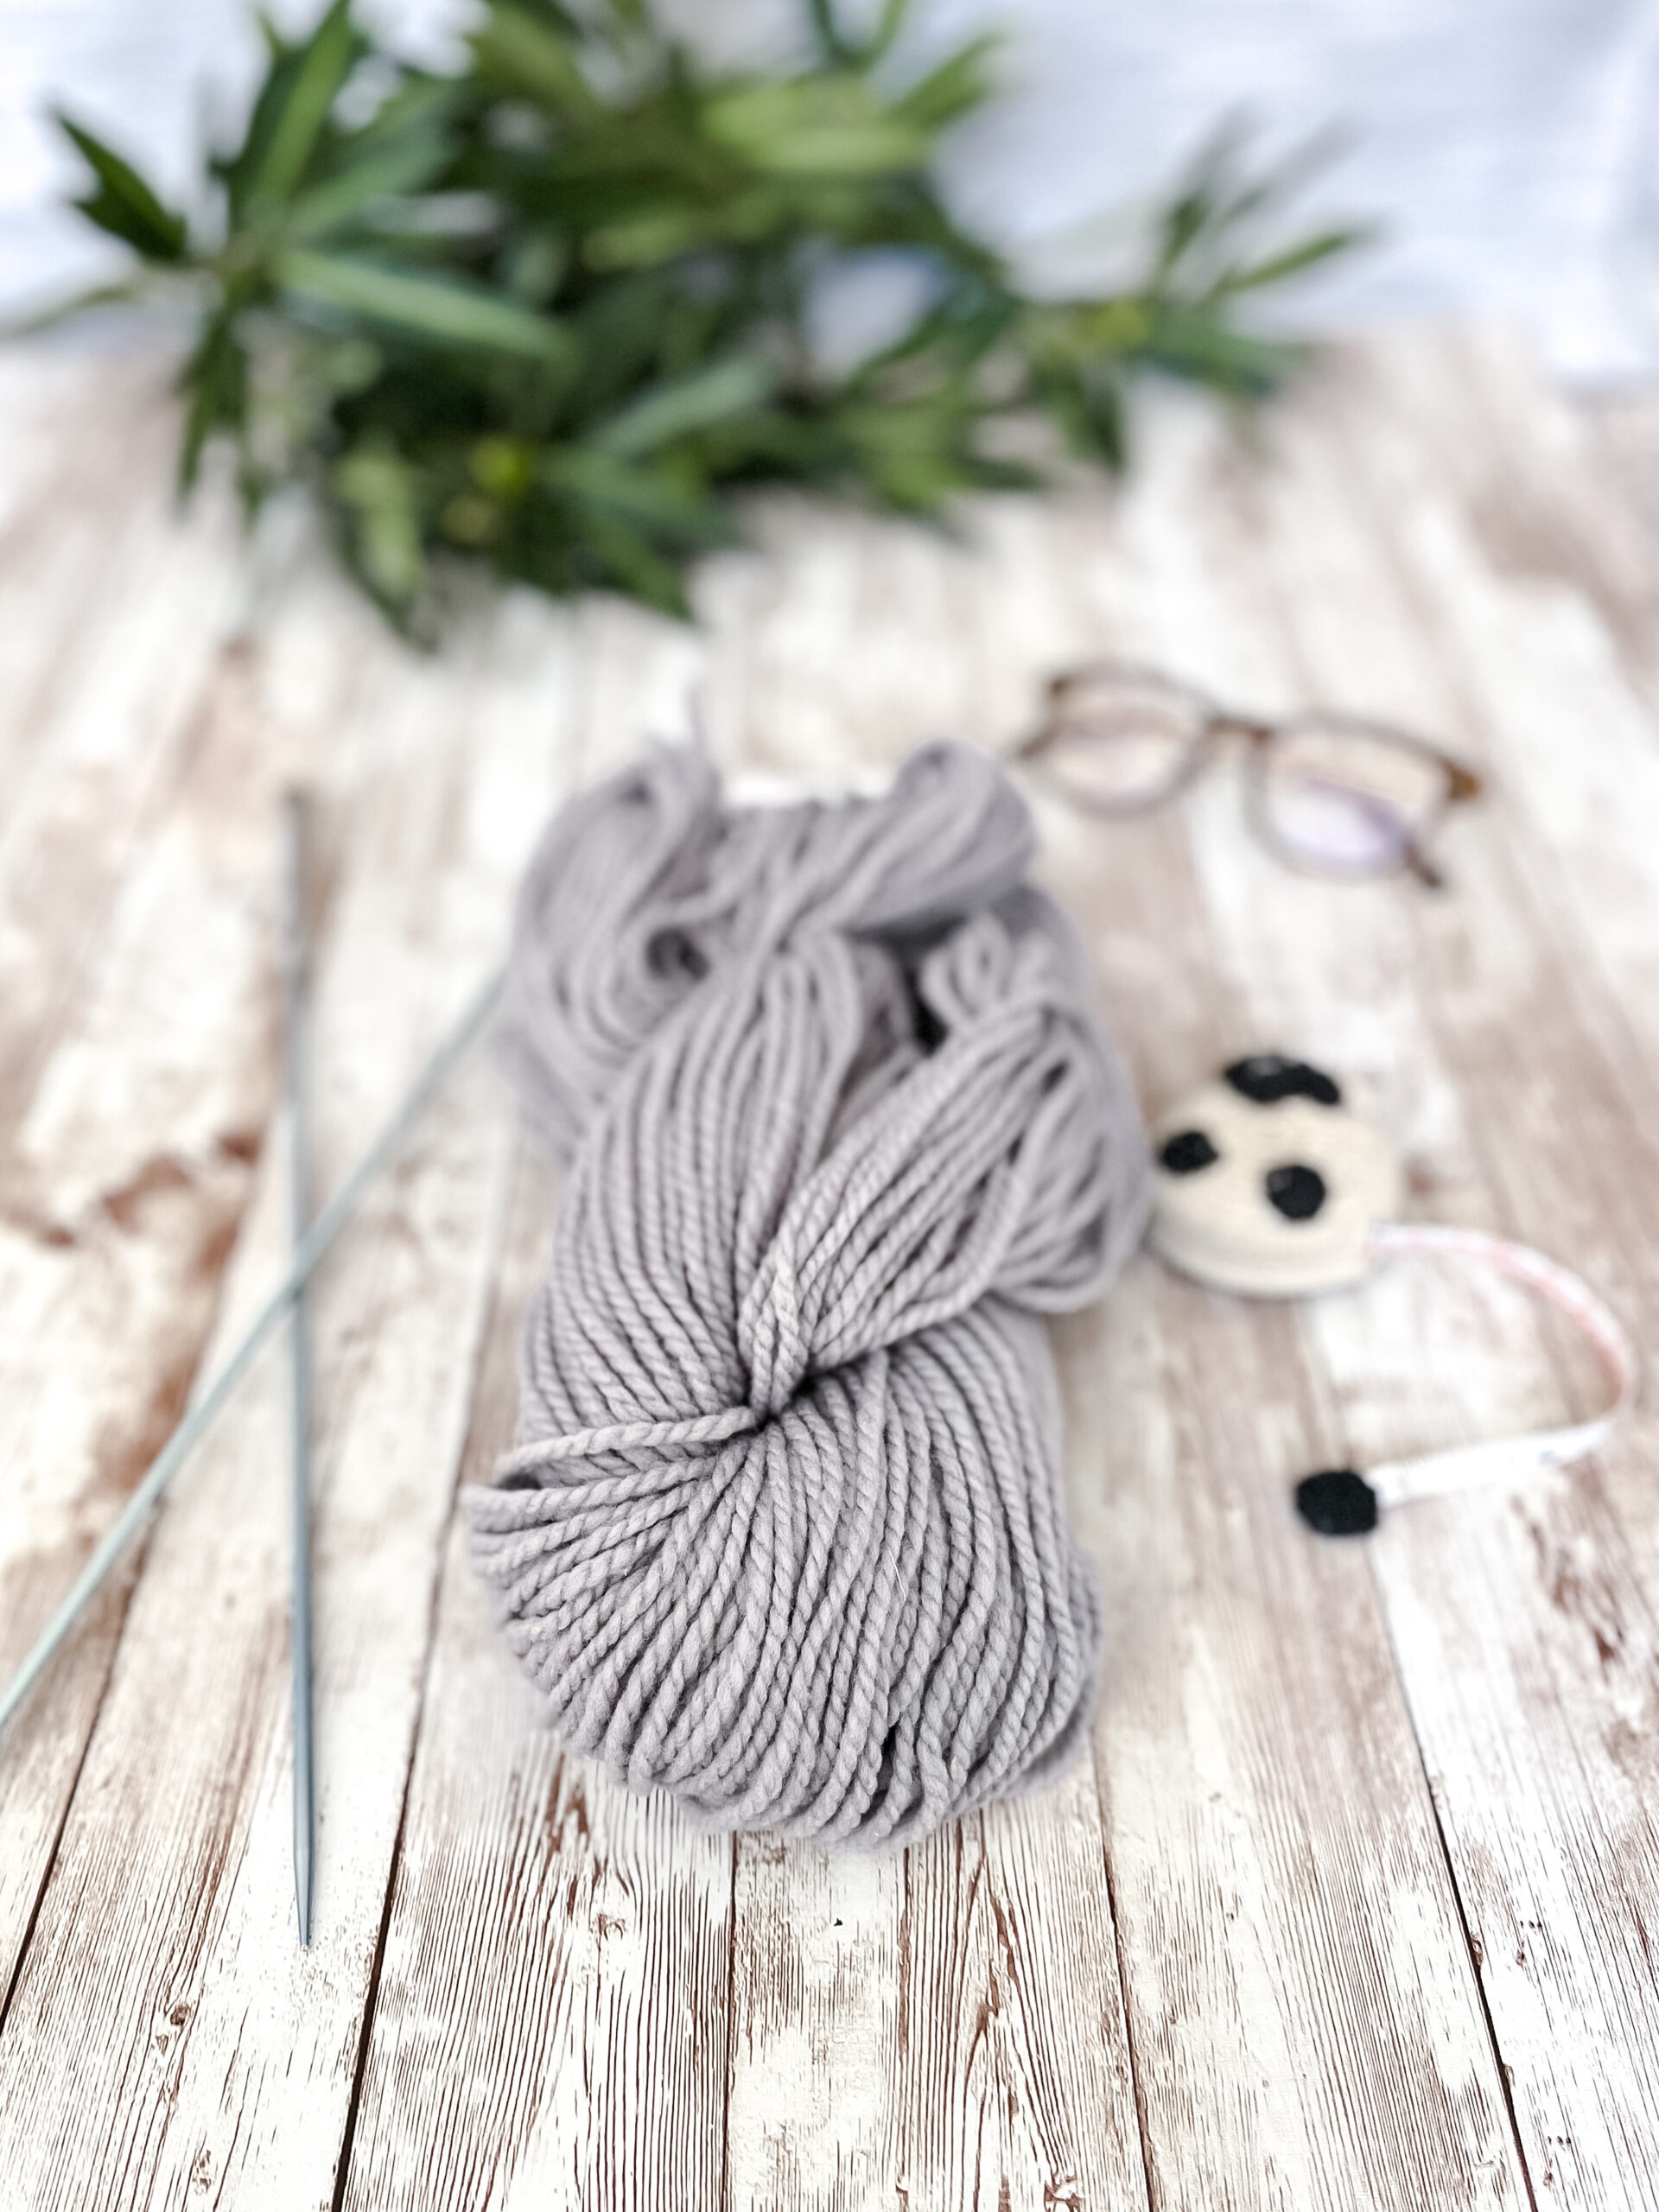 A hank of gray, Virginia farmed fine merino yarn rests on a wood plank, with knitting needles, a sheep measuring tape, a pair of reading glasses, and some greenery around it